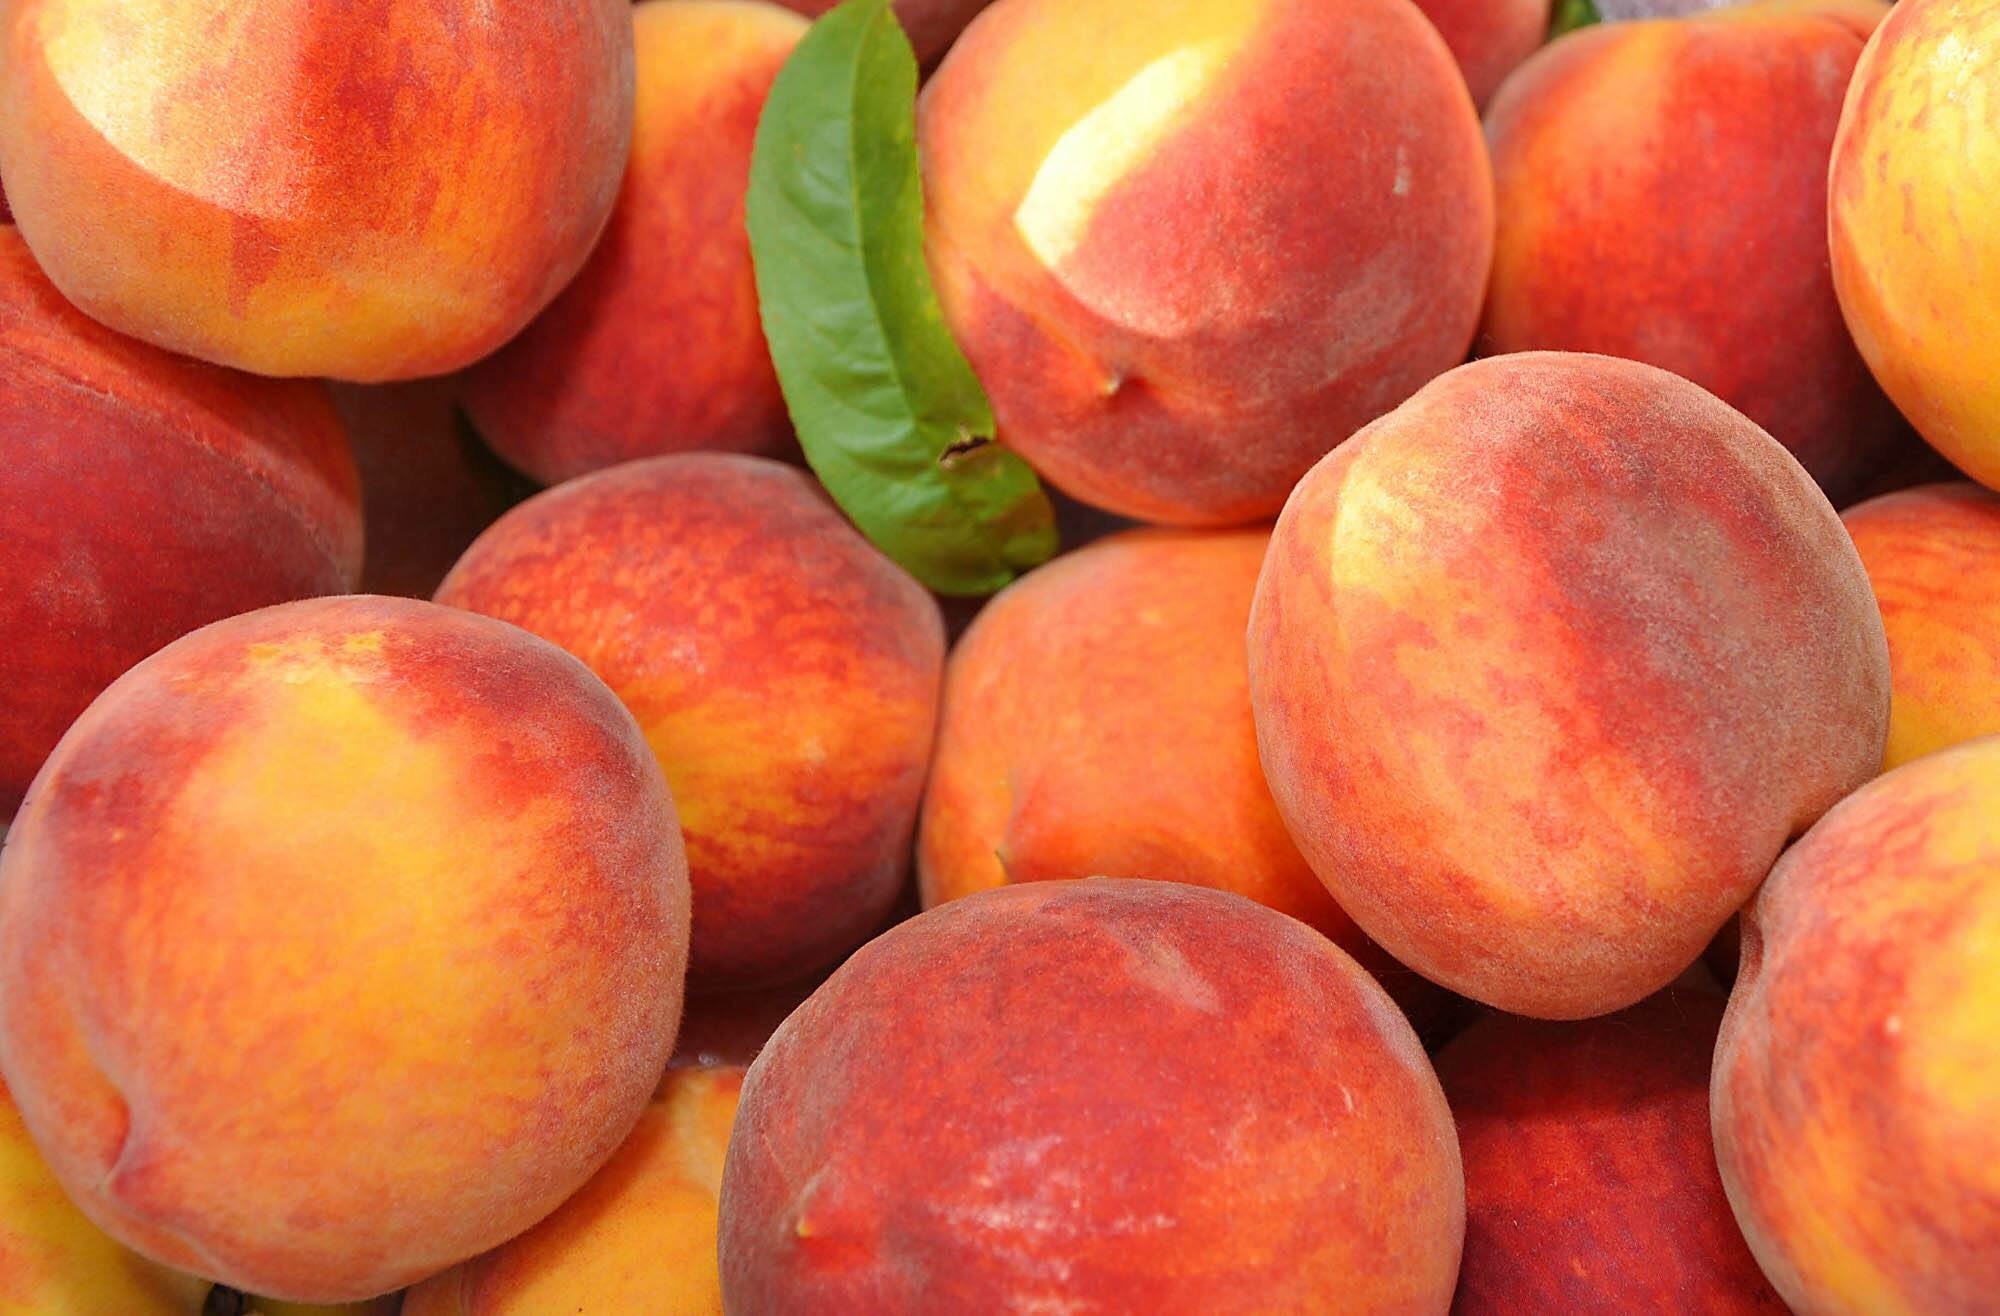 peaches westminster md farmers market